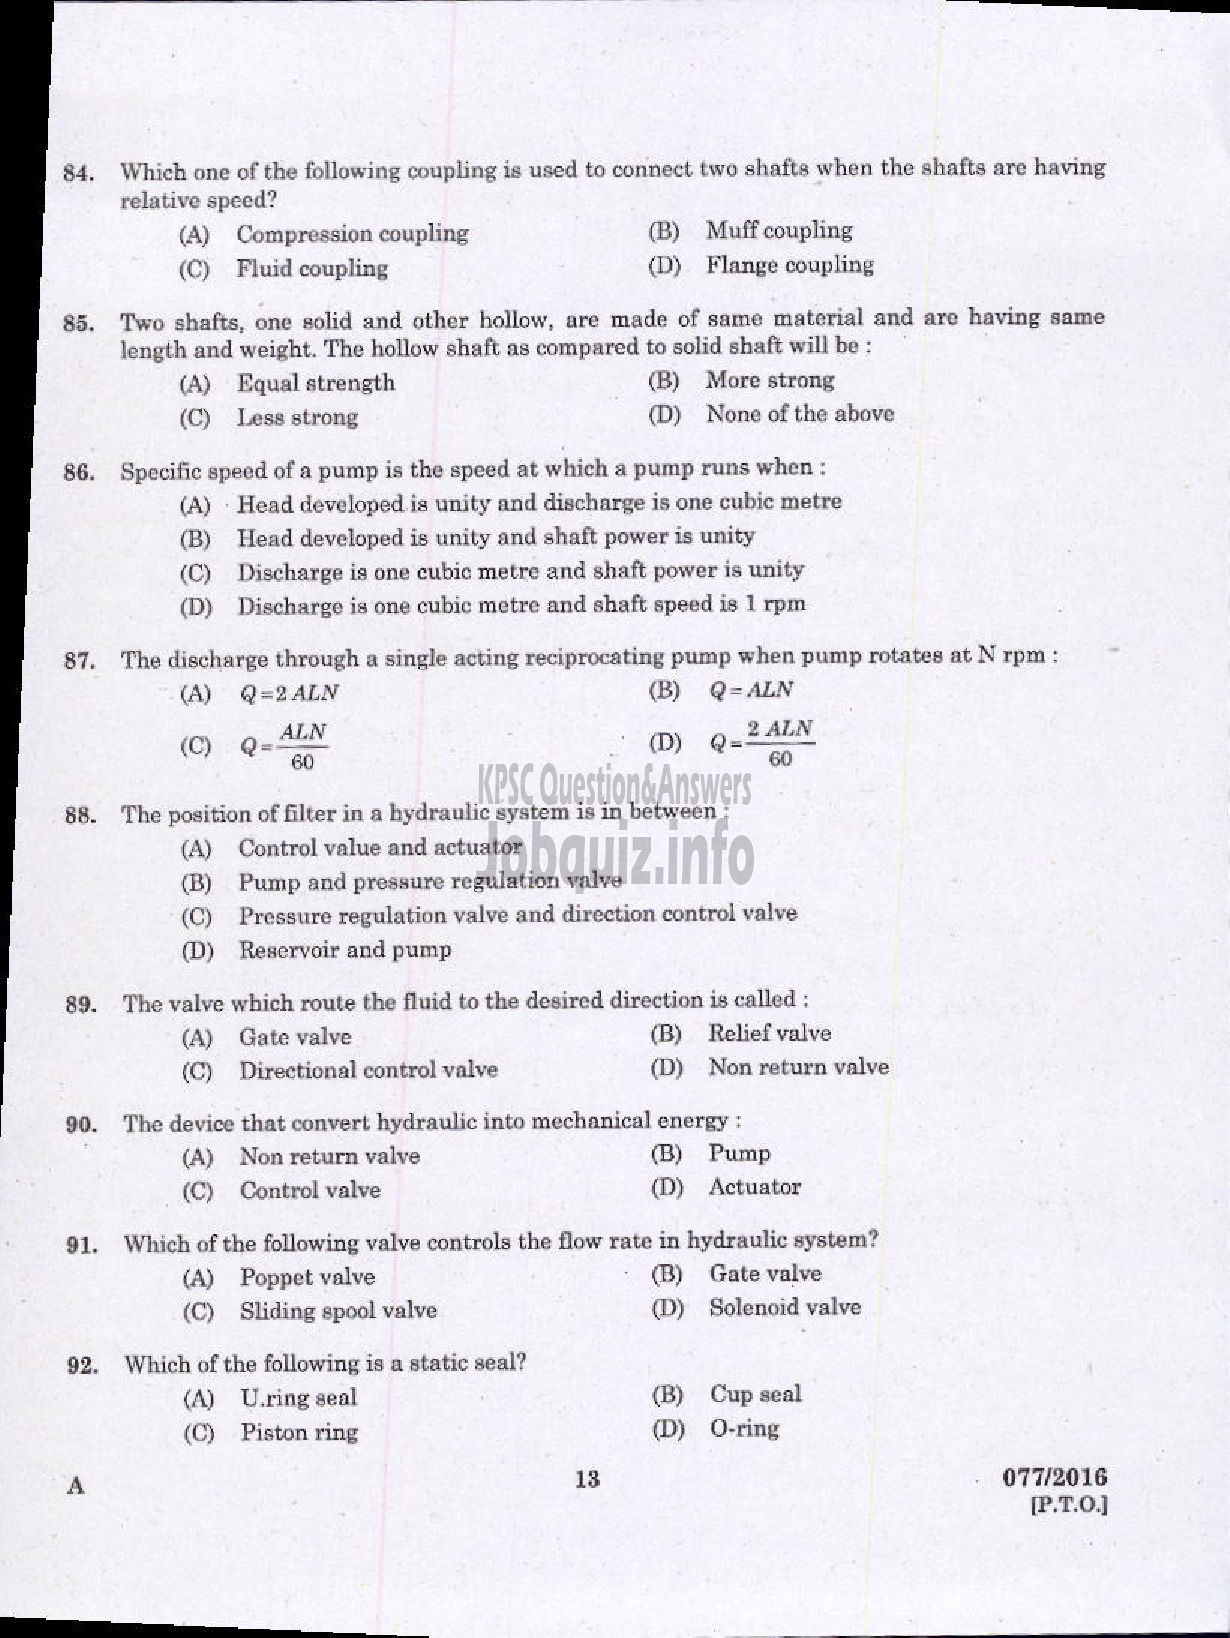 Kerala PSC Question Paper - VOCATIONAL INSTRUCTOR IN MECHANICAL SERVICING AGRO MACHINERY VHSE-11